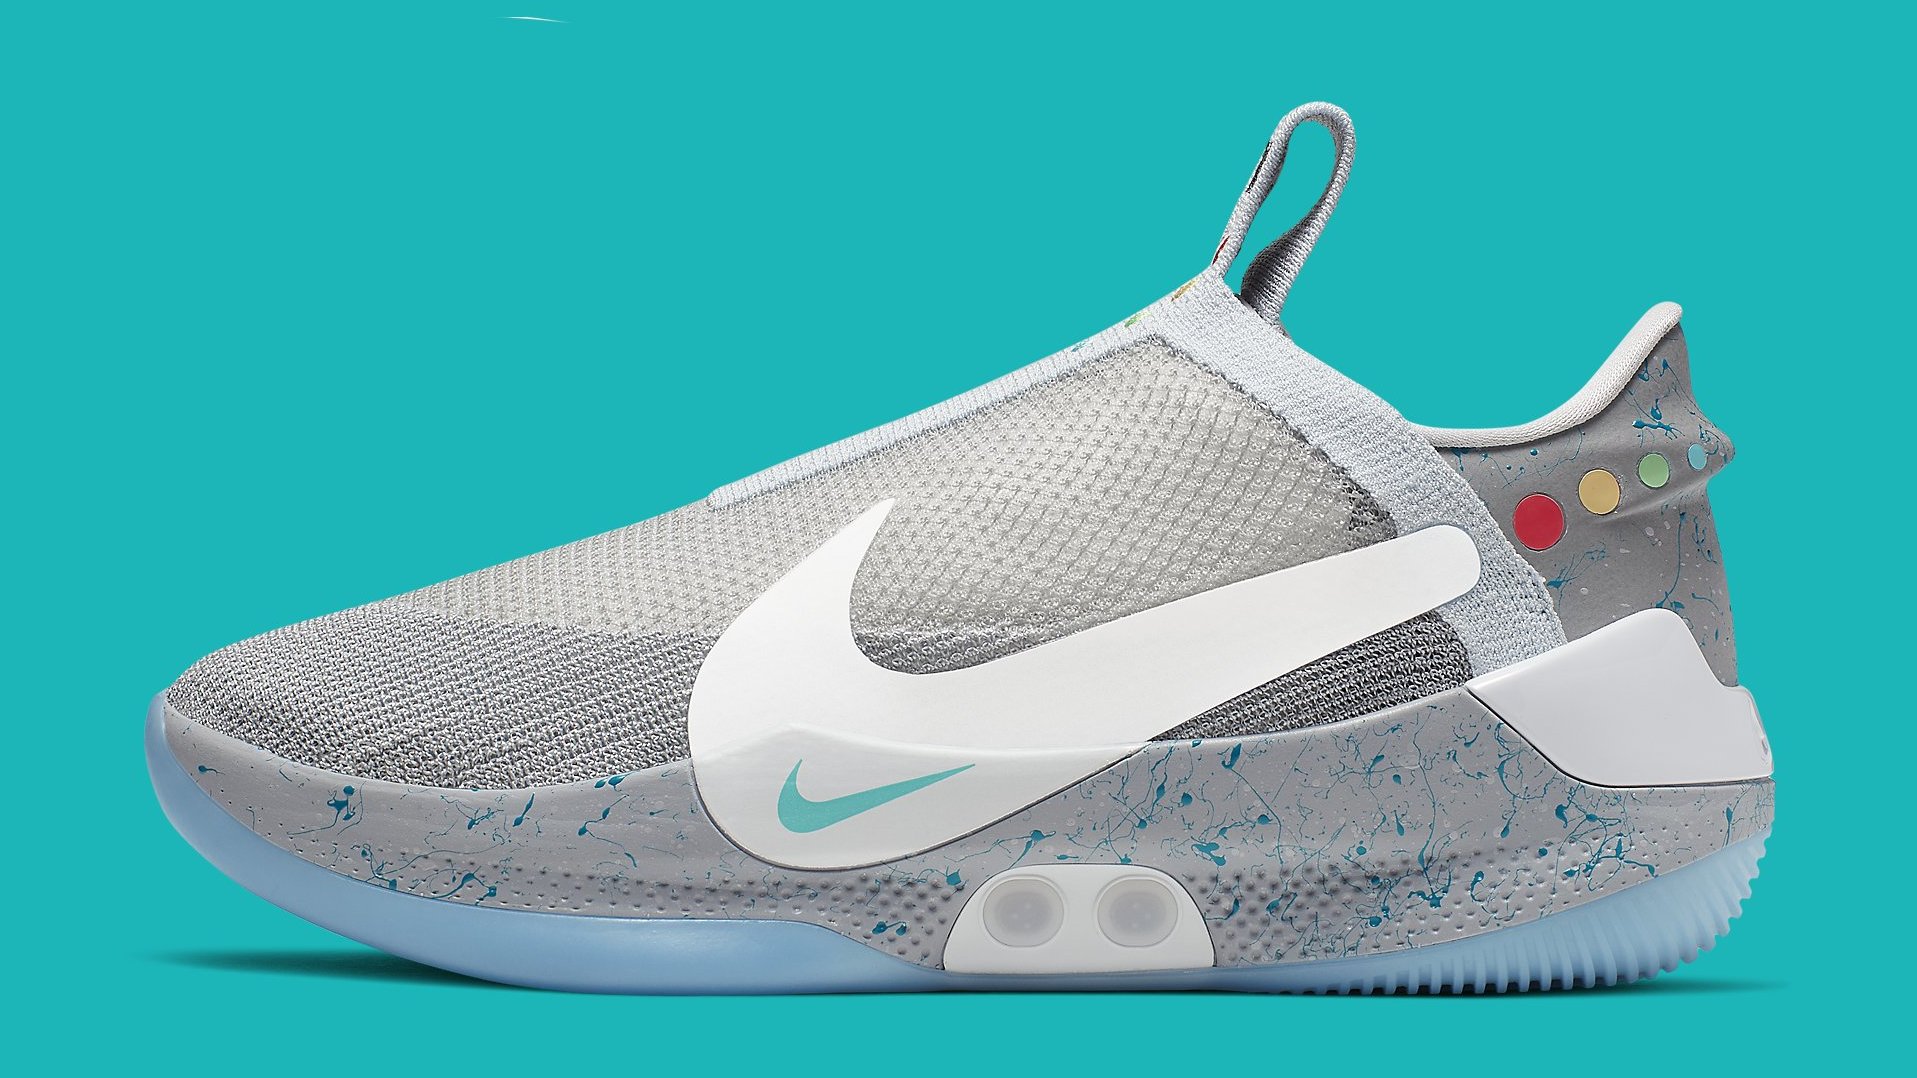 Nike Adapt BB Mag Release Date May 29, 2019 | Sole Collector